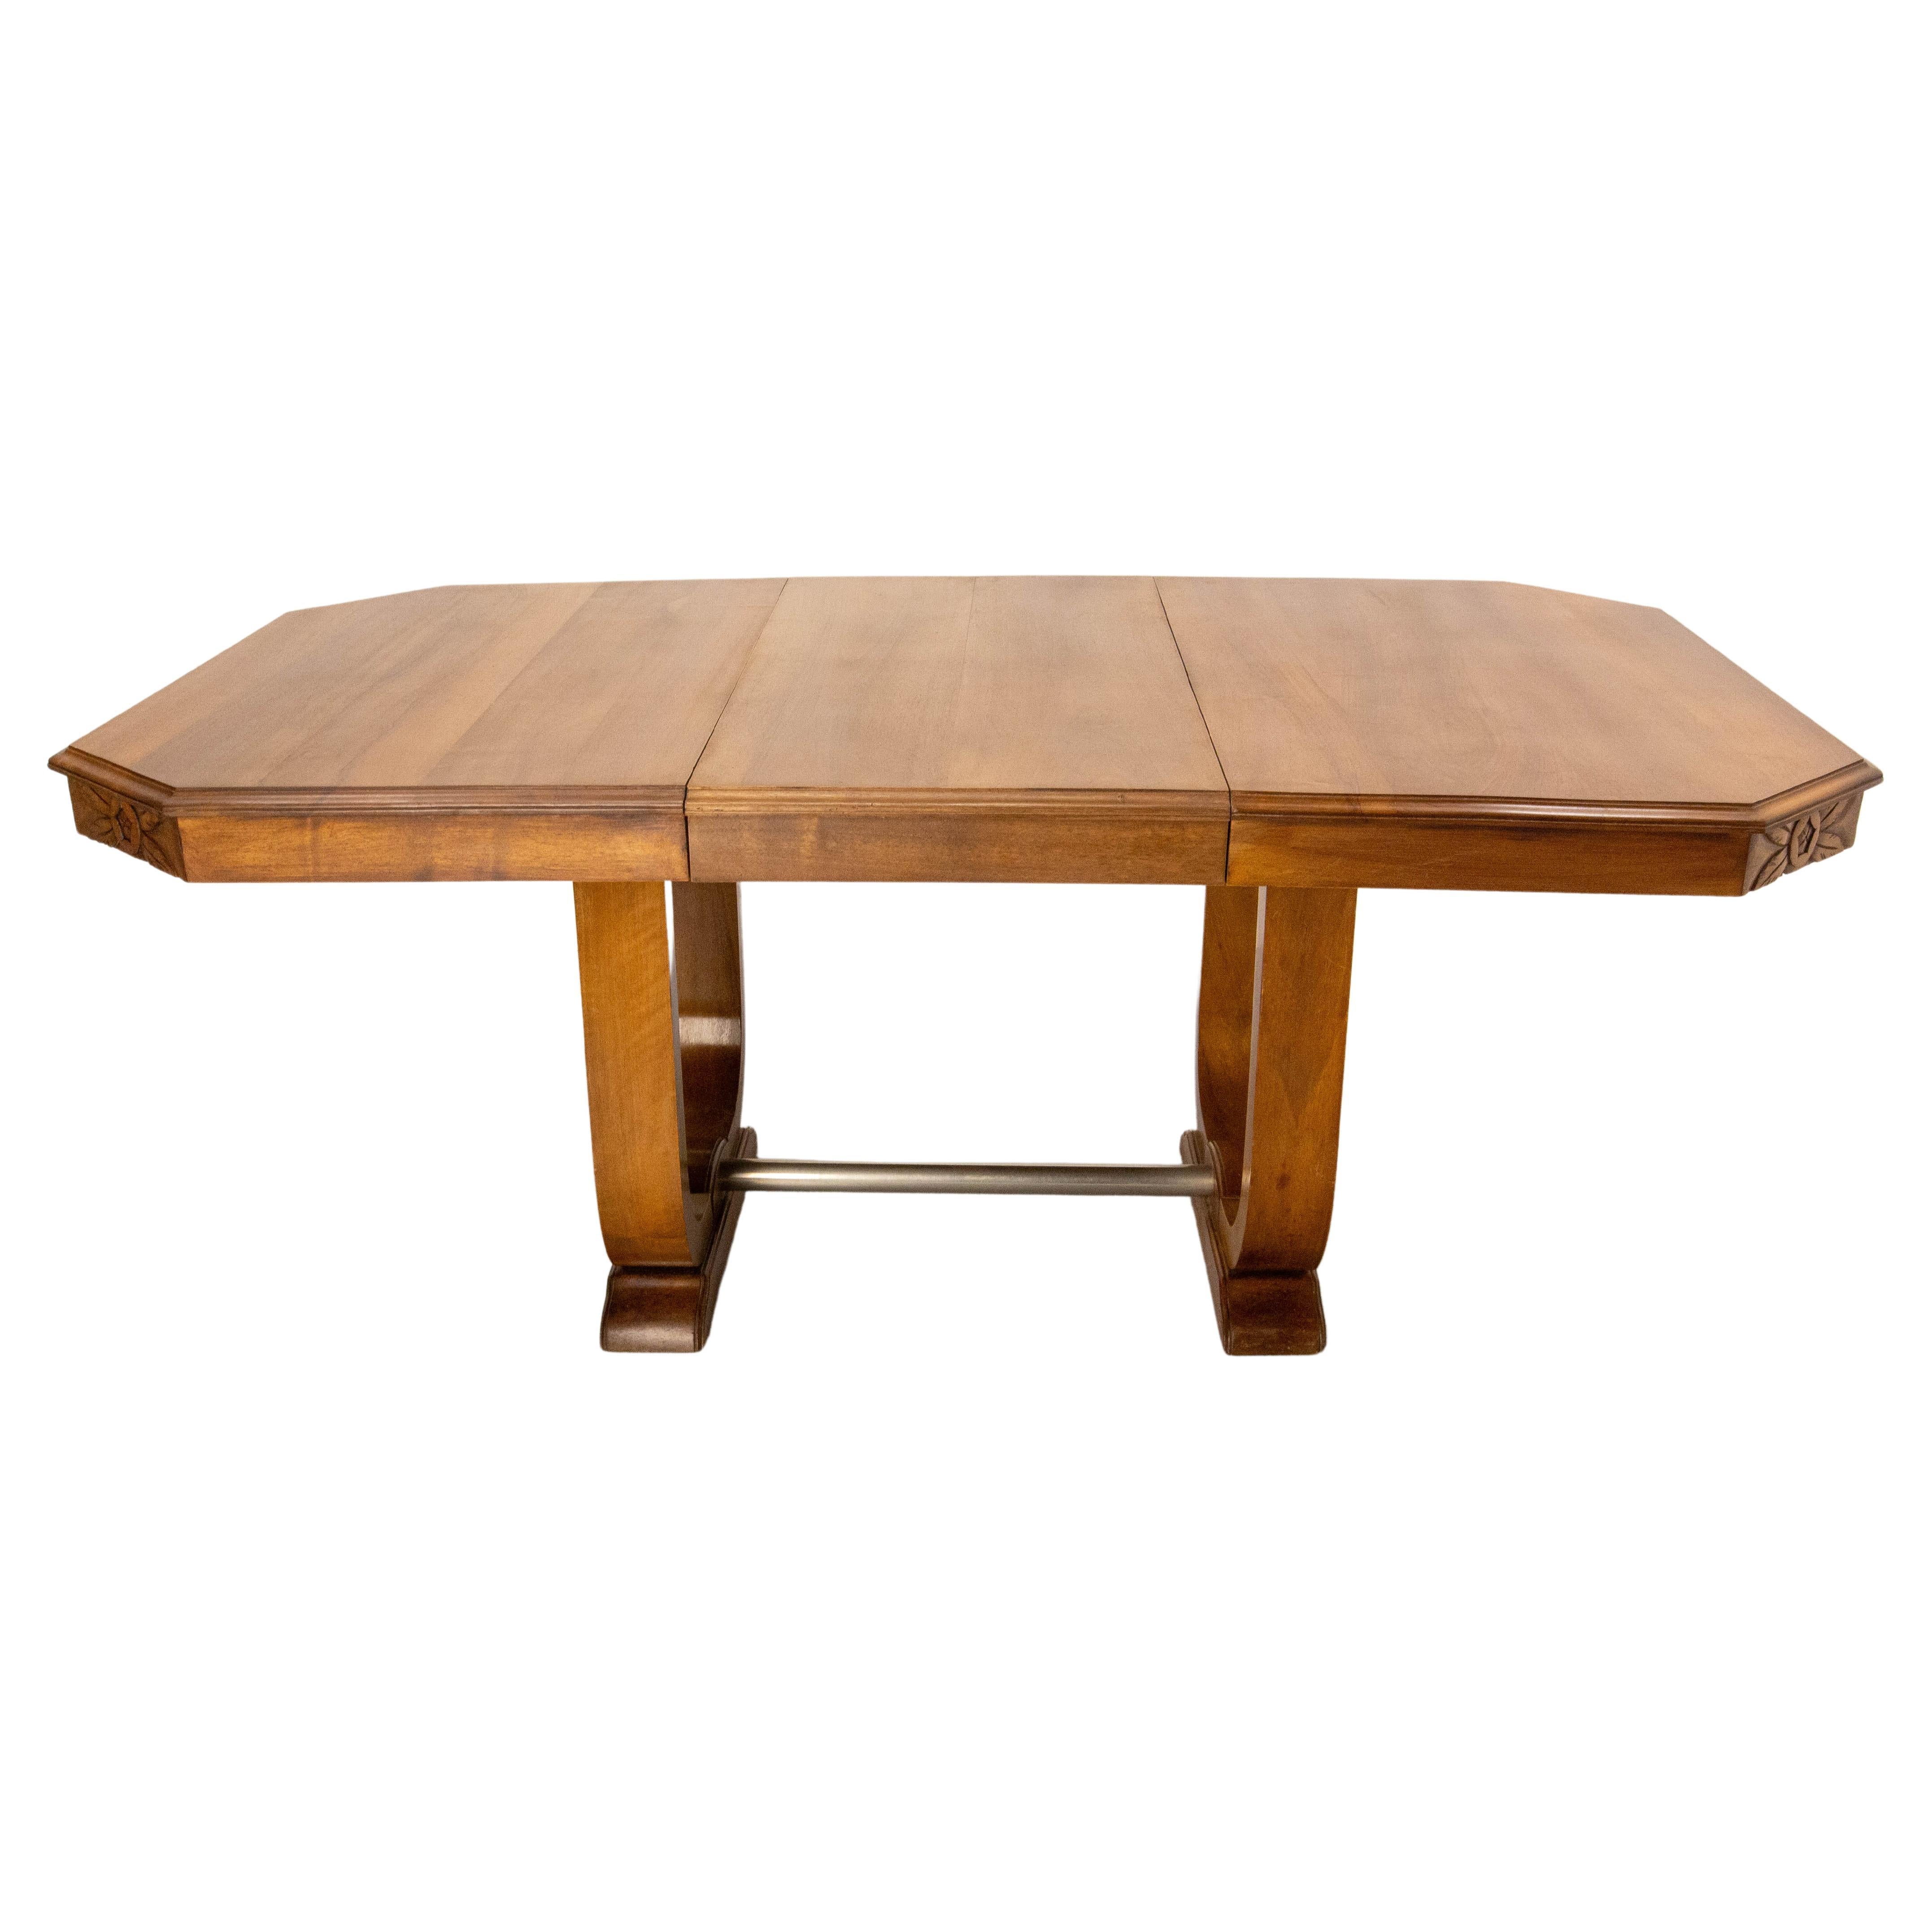 Dining Walnut Table with Central Extension  Art Déco Period, circa 1930 France For Sale